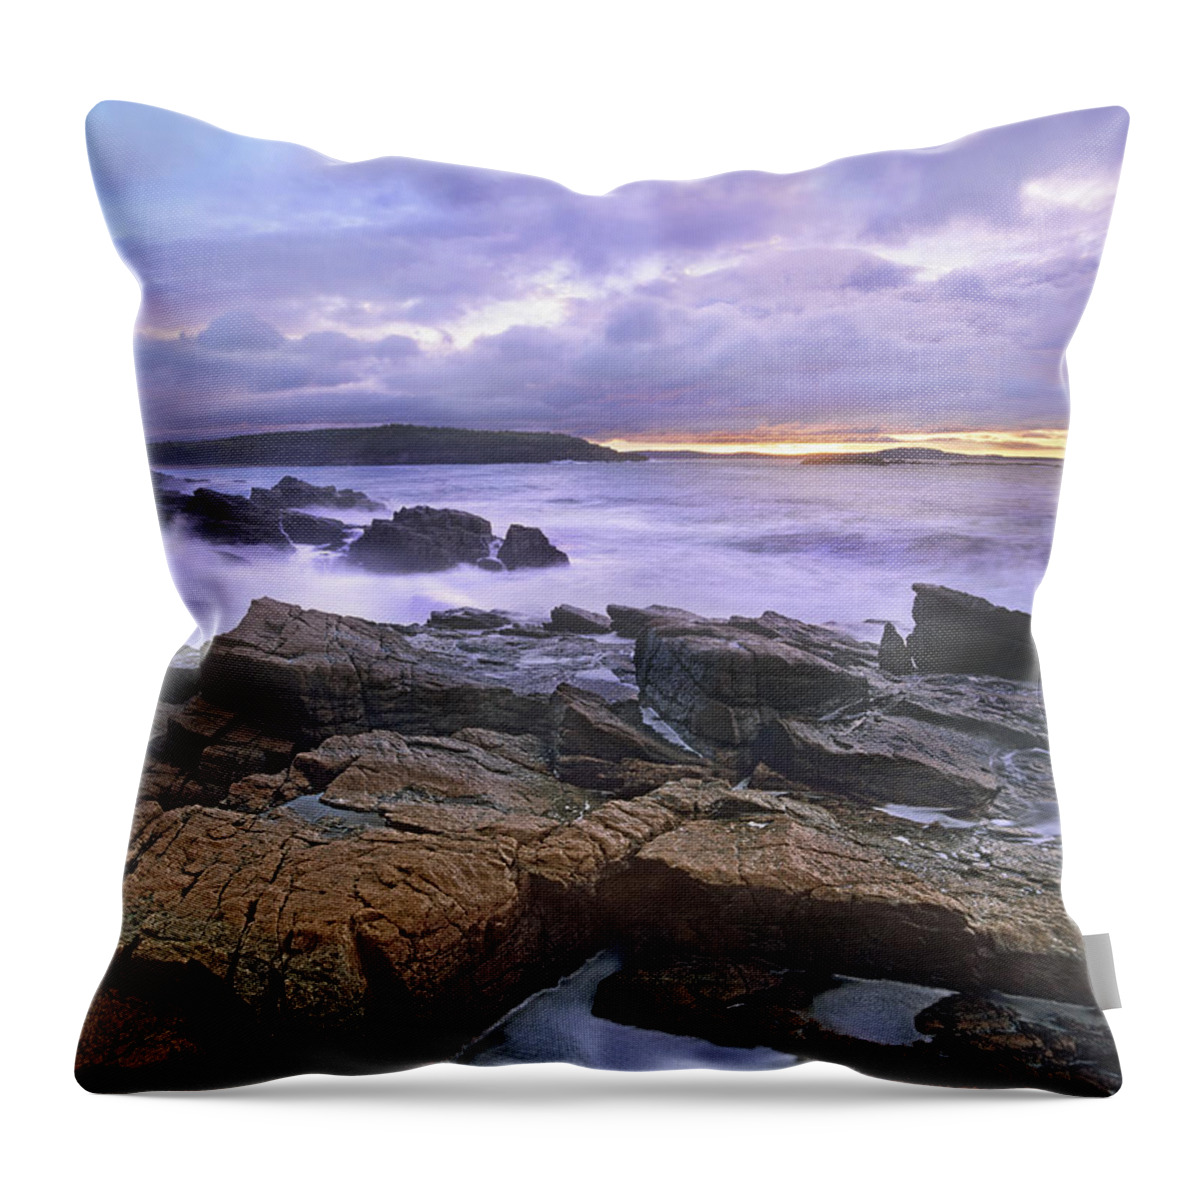 533804 Throw Pillow featuring the photograph Old Soaker Acadia Maine by Tim Fitzharris